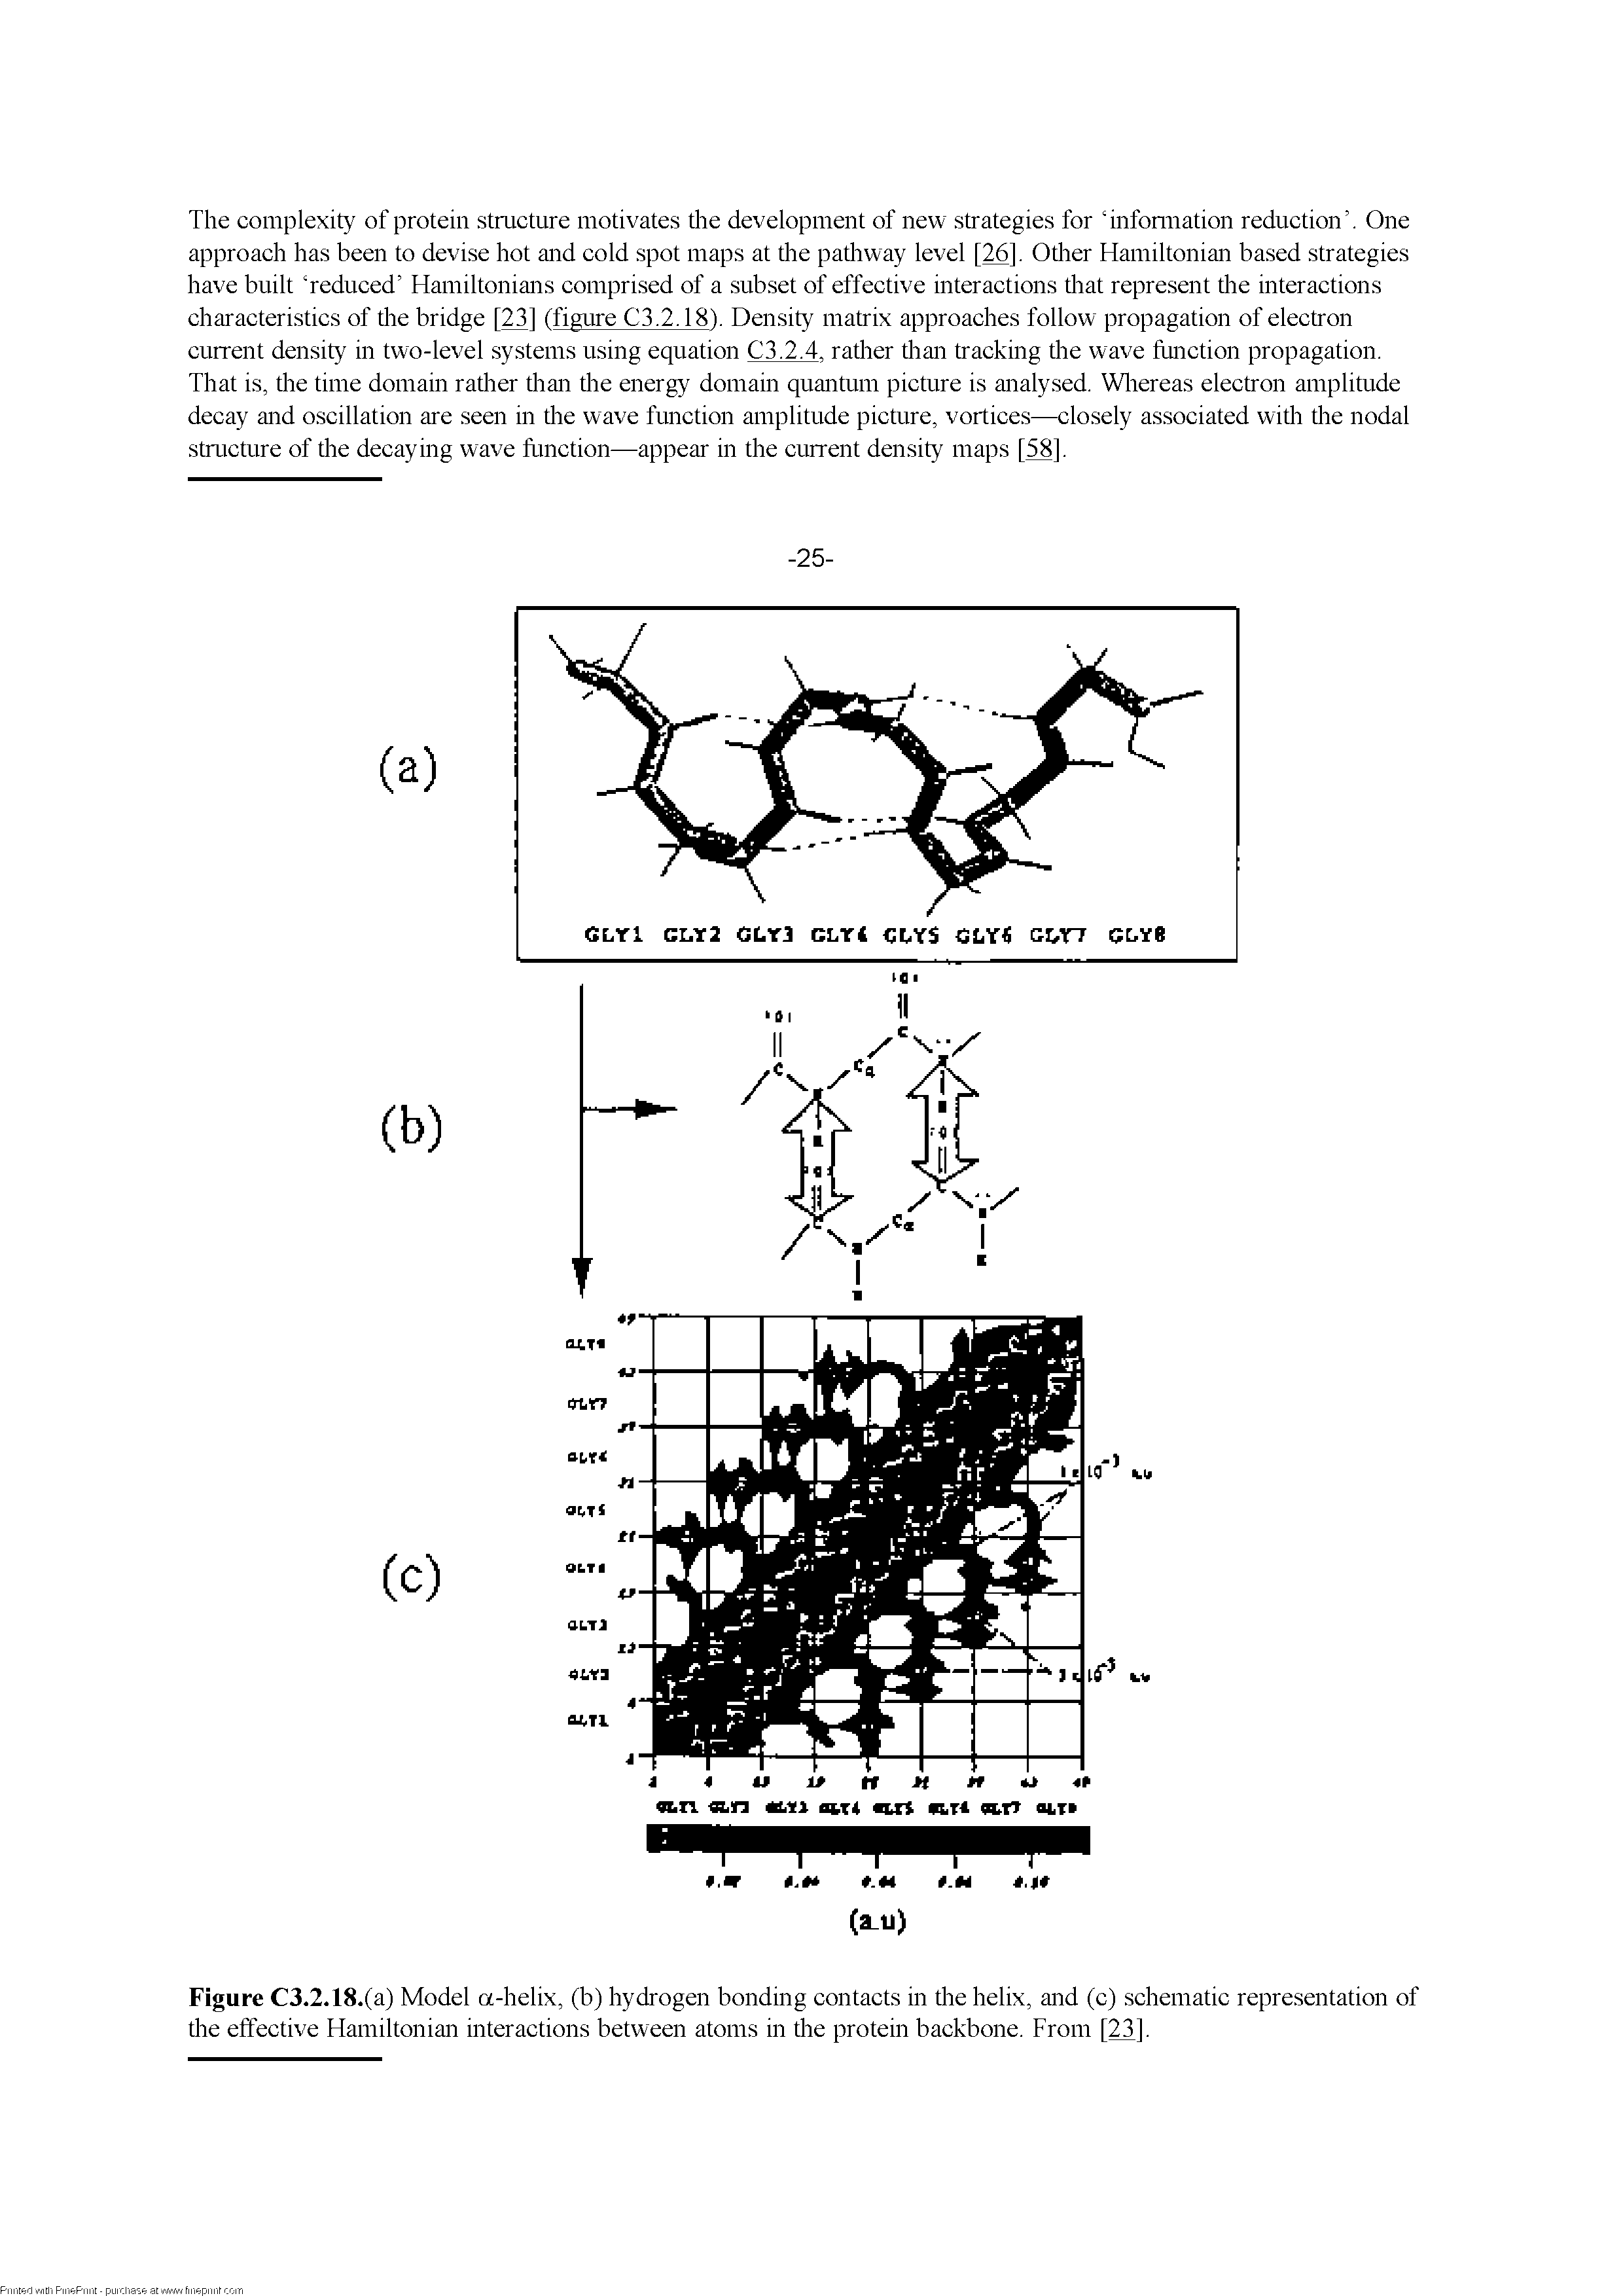 Figure C3.2.18.(a) Model a-helix, (b) hydrogen bonding contacts in tire helix, and (c) schematic representation of tire effective Hamiltonian interactions between atoms in tire protein backbone. From [23].